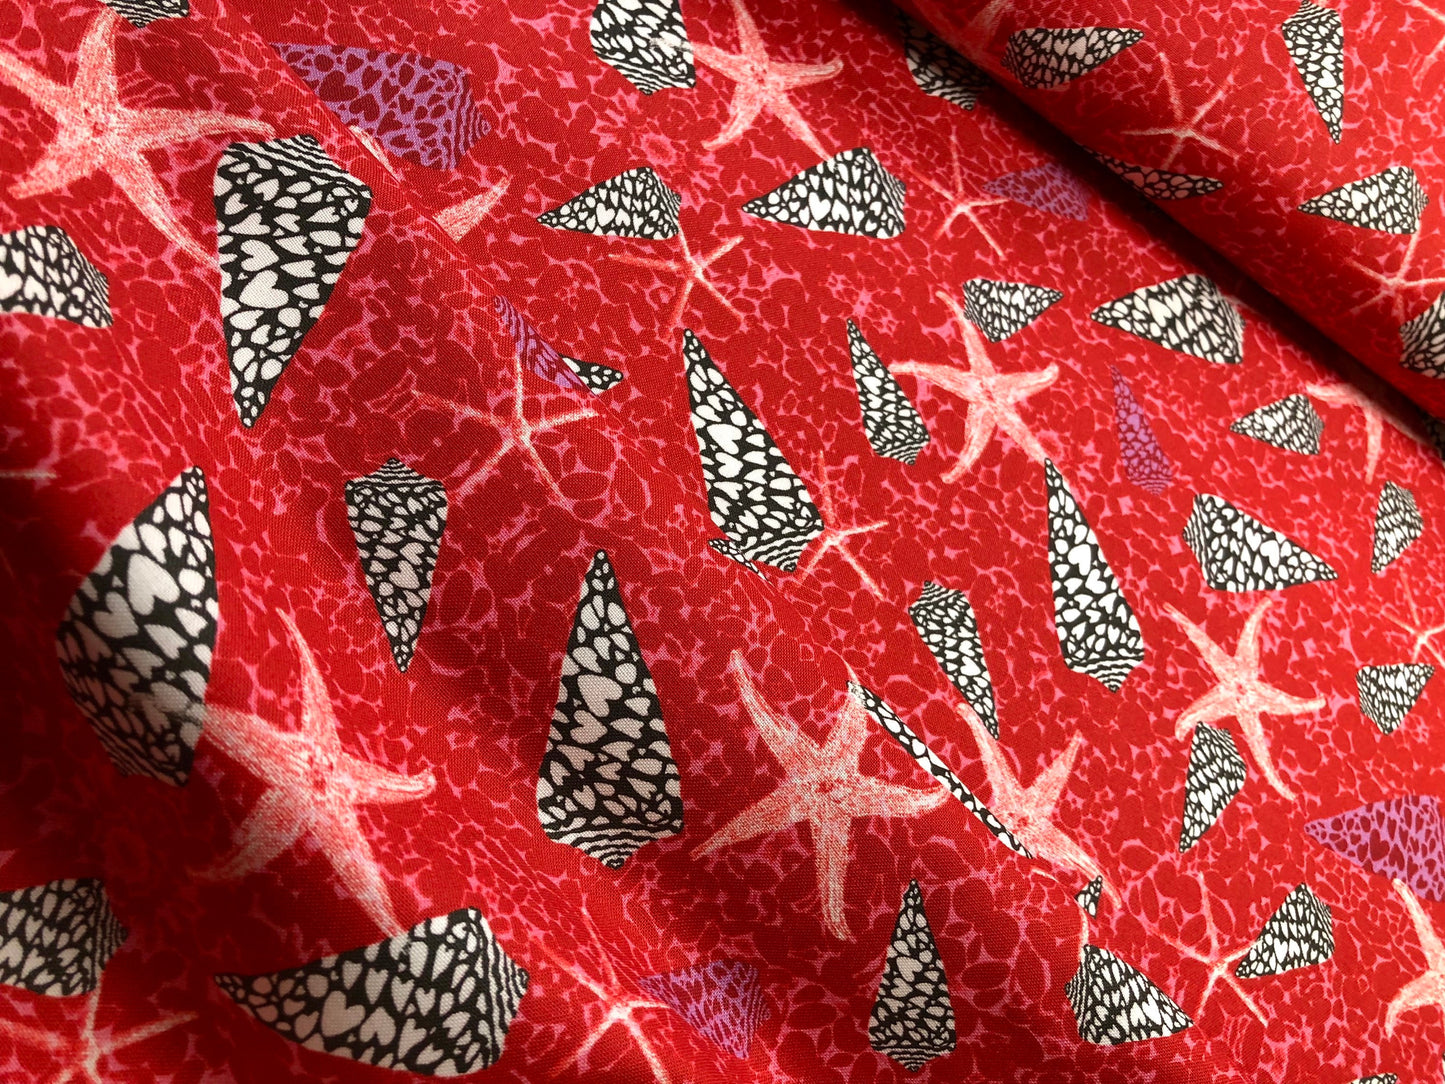 Stof of Denmark OCEAN JEWELS 4501-716 Starfish, Quilt Fabric, Cotton Fabric, Quilting Fabric, Nautical Fabric, Fabric By The Yard